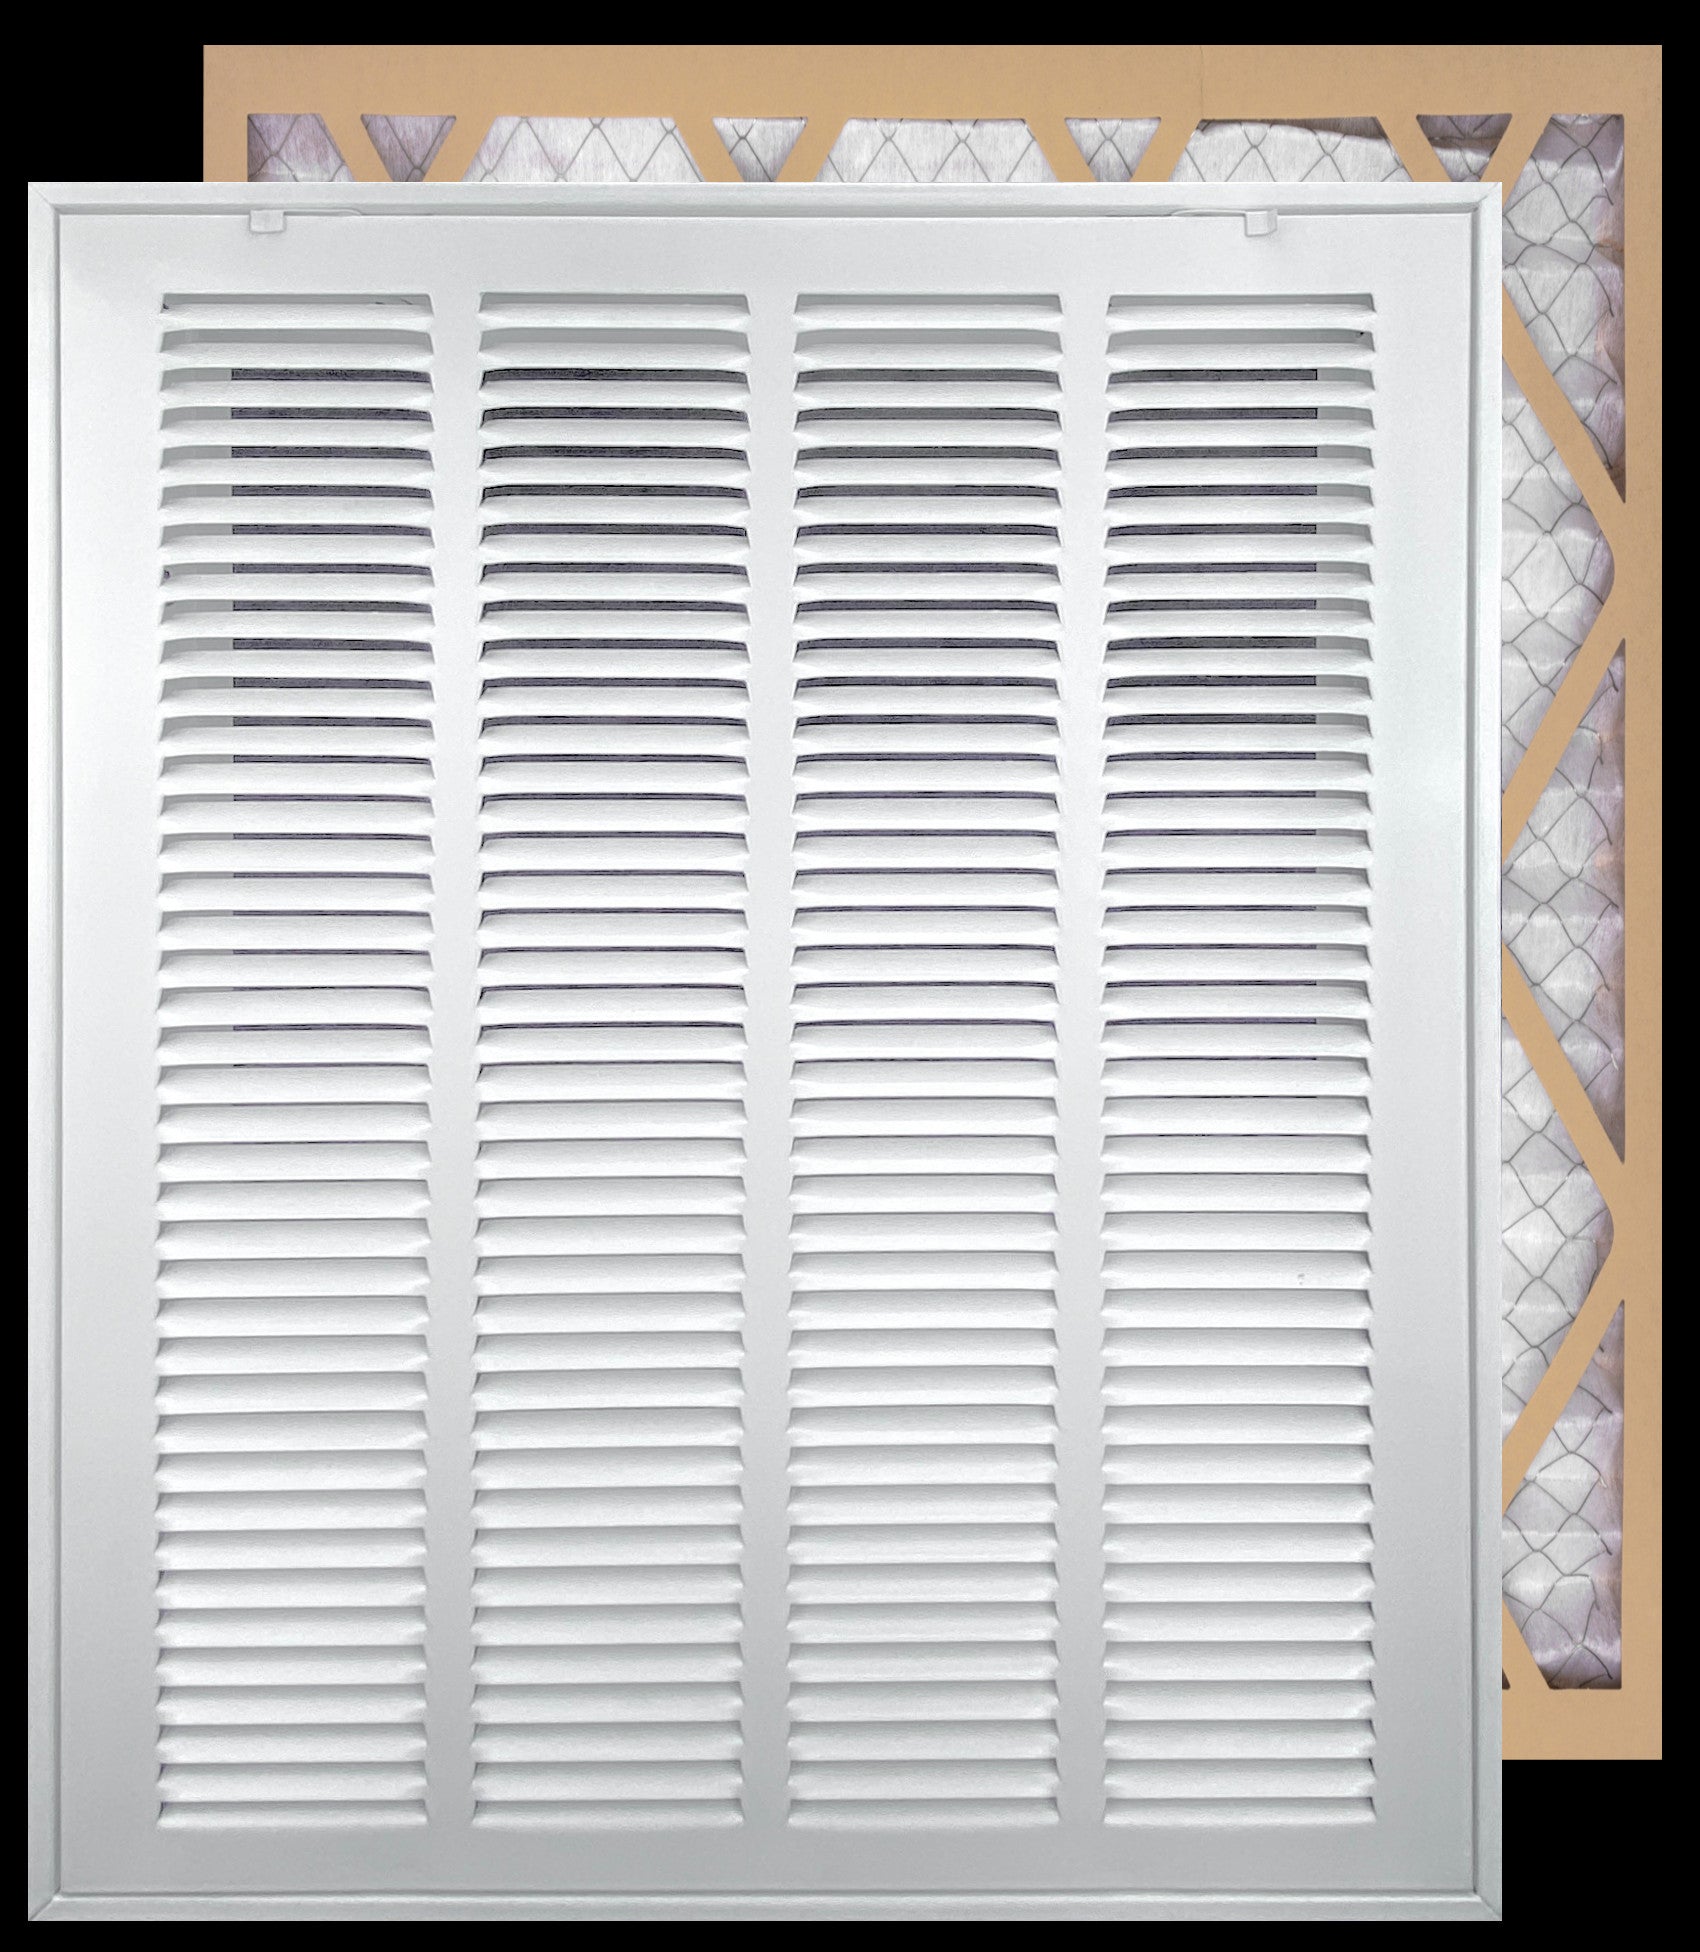 airgrilles 16" x 20" duct opening   filter included hd steel return air filter grille for sidewall and ceiling fil-7rafg1-wh-16x20 038775643887 - 1